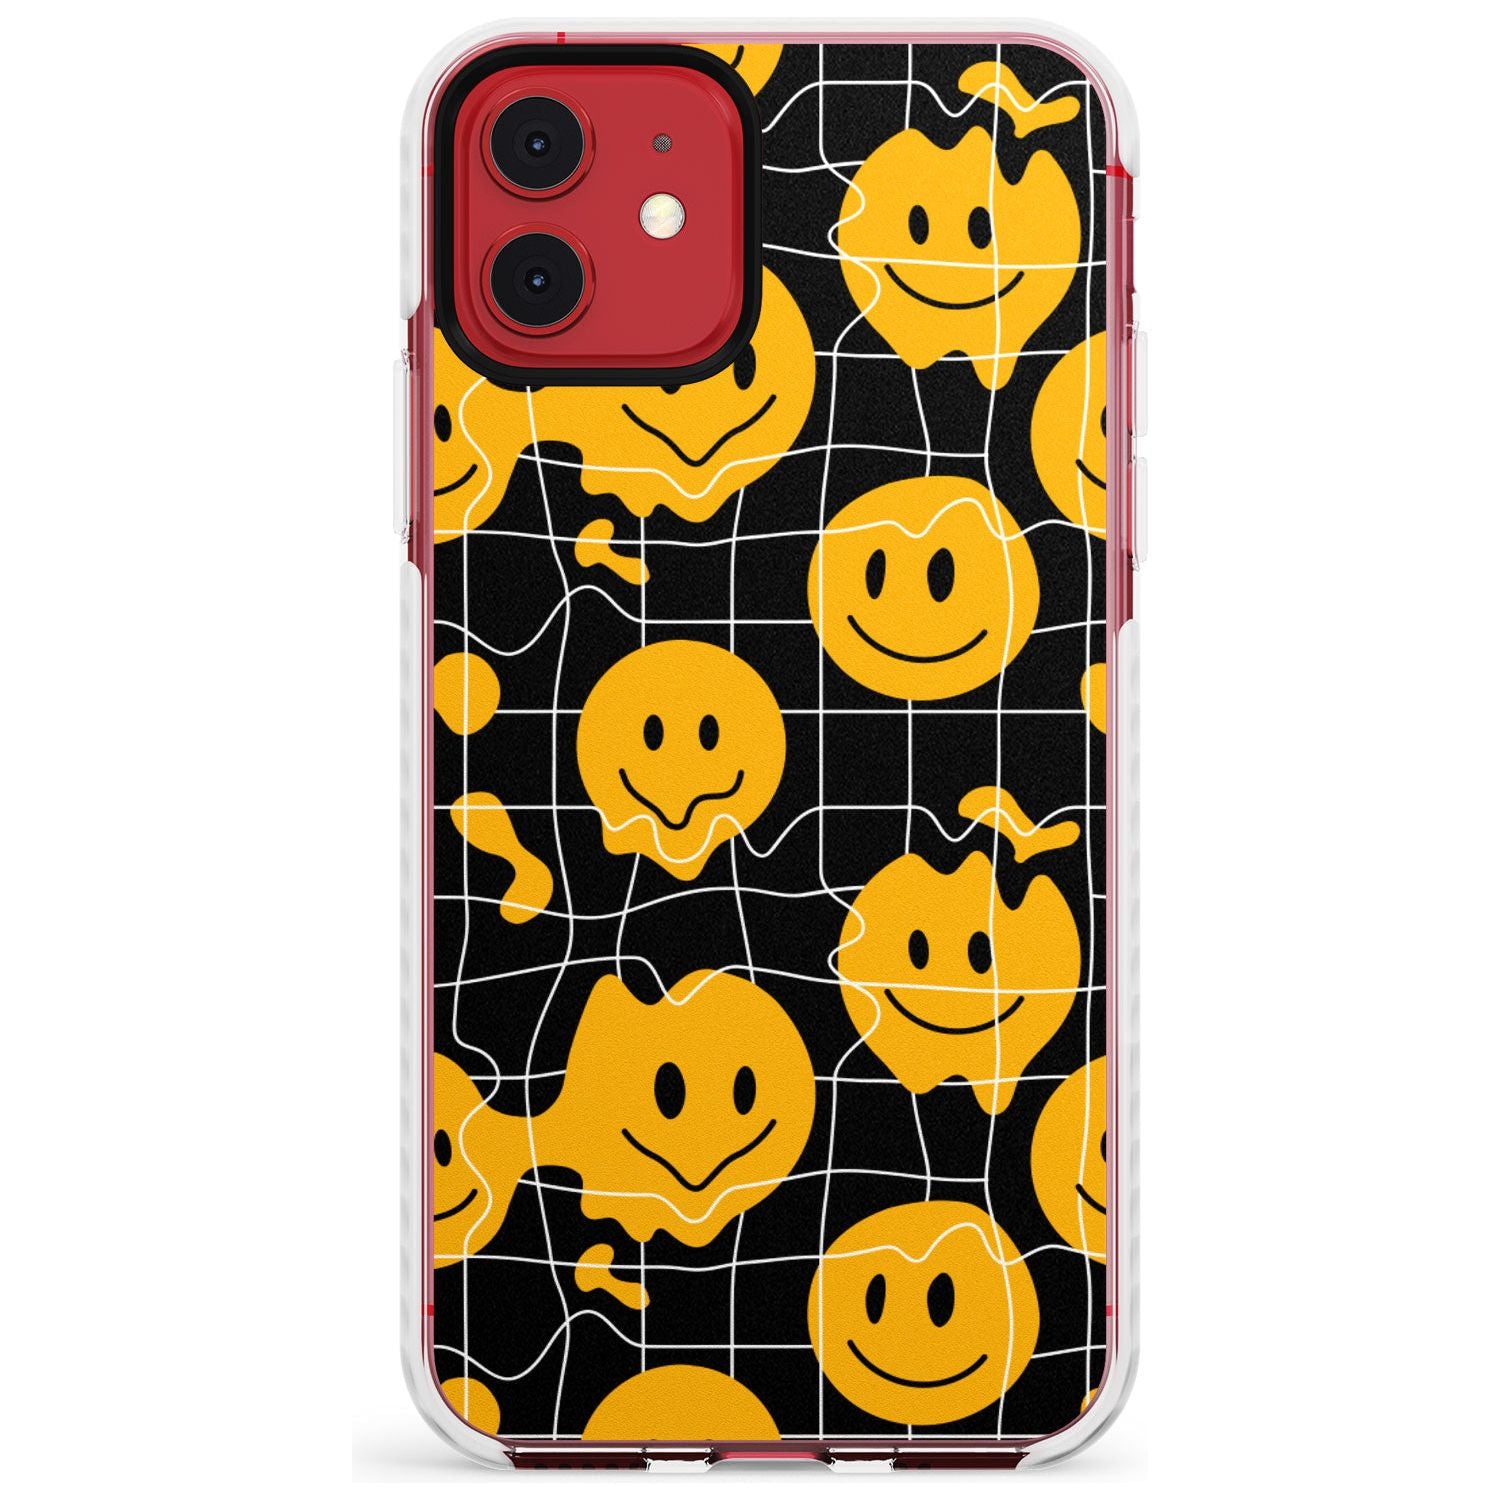 Acid Face Grid Pattern Impact Phone Case for iPhone 11